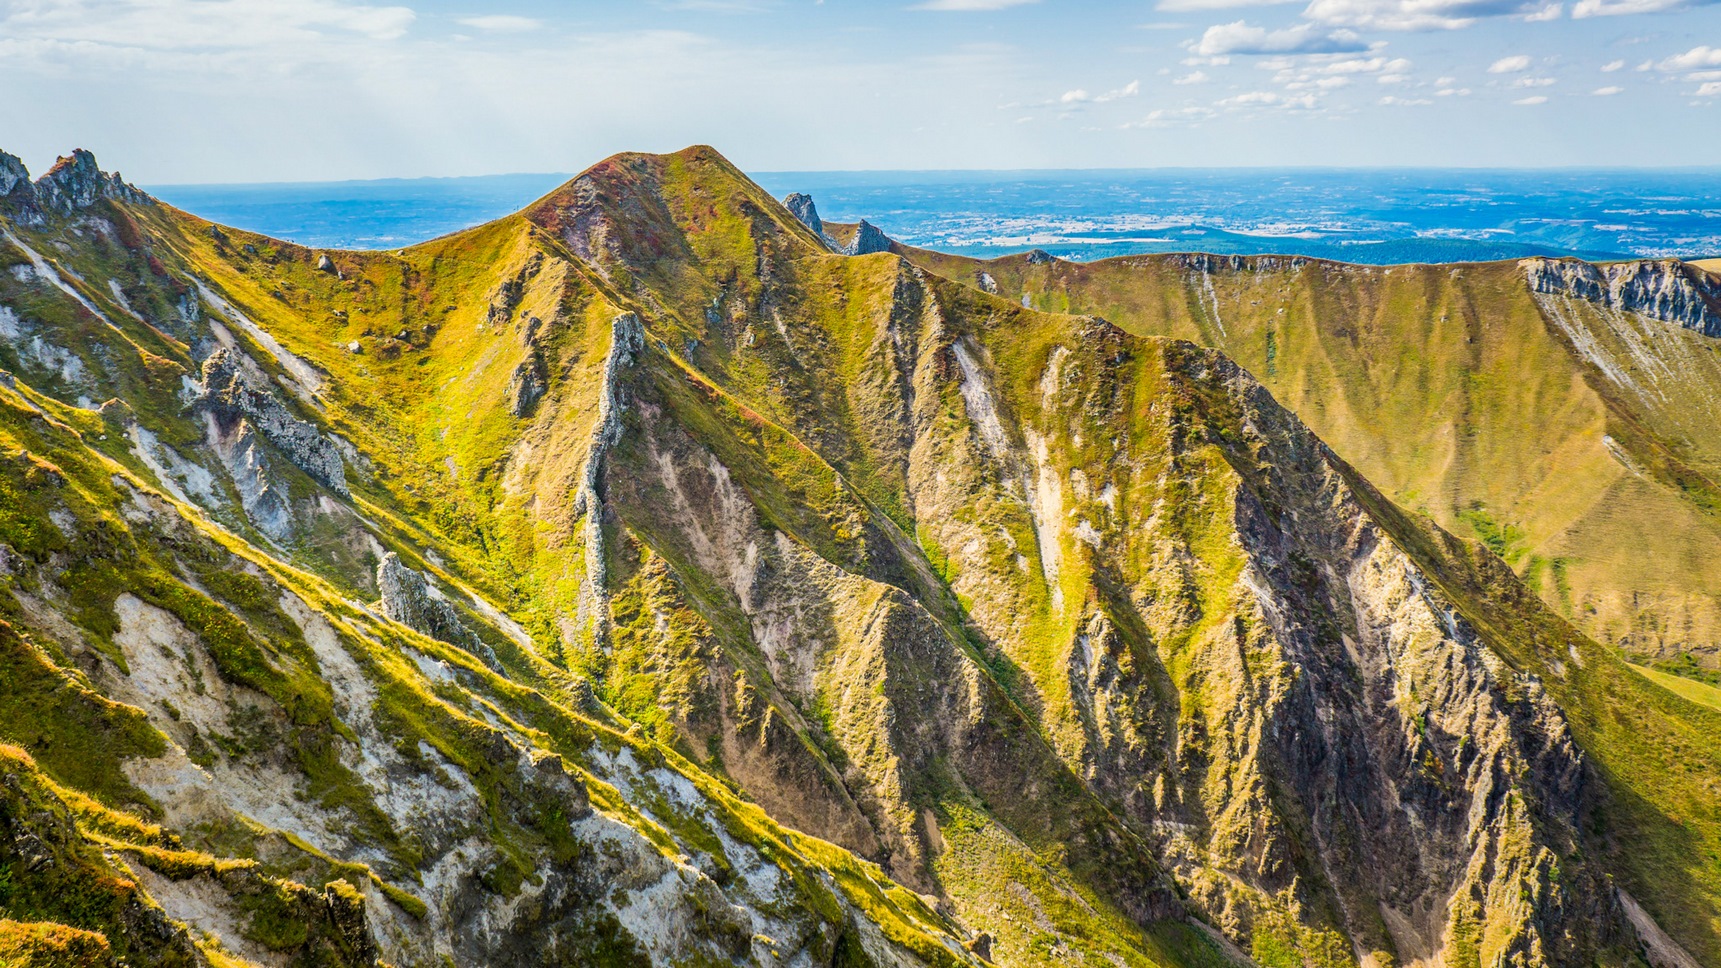 Aerial view of the Massif du Sancy, view of the summits of Sancy